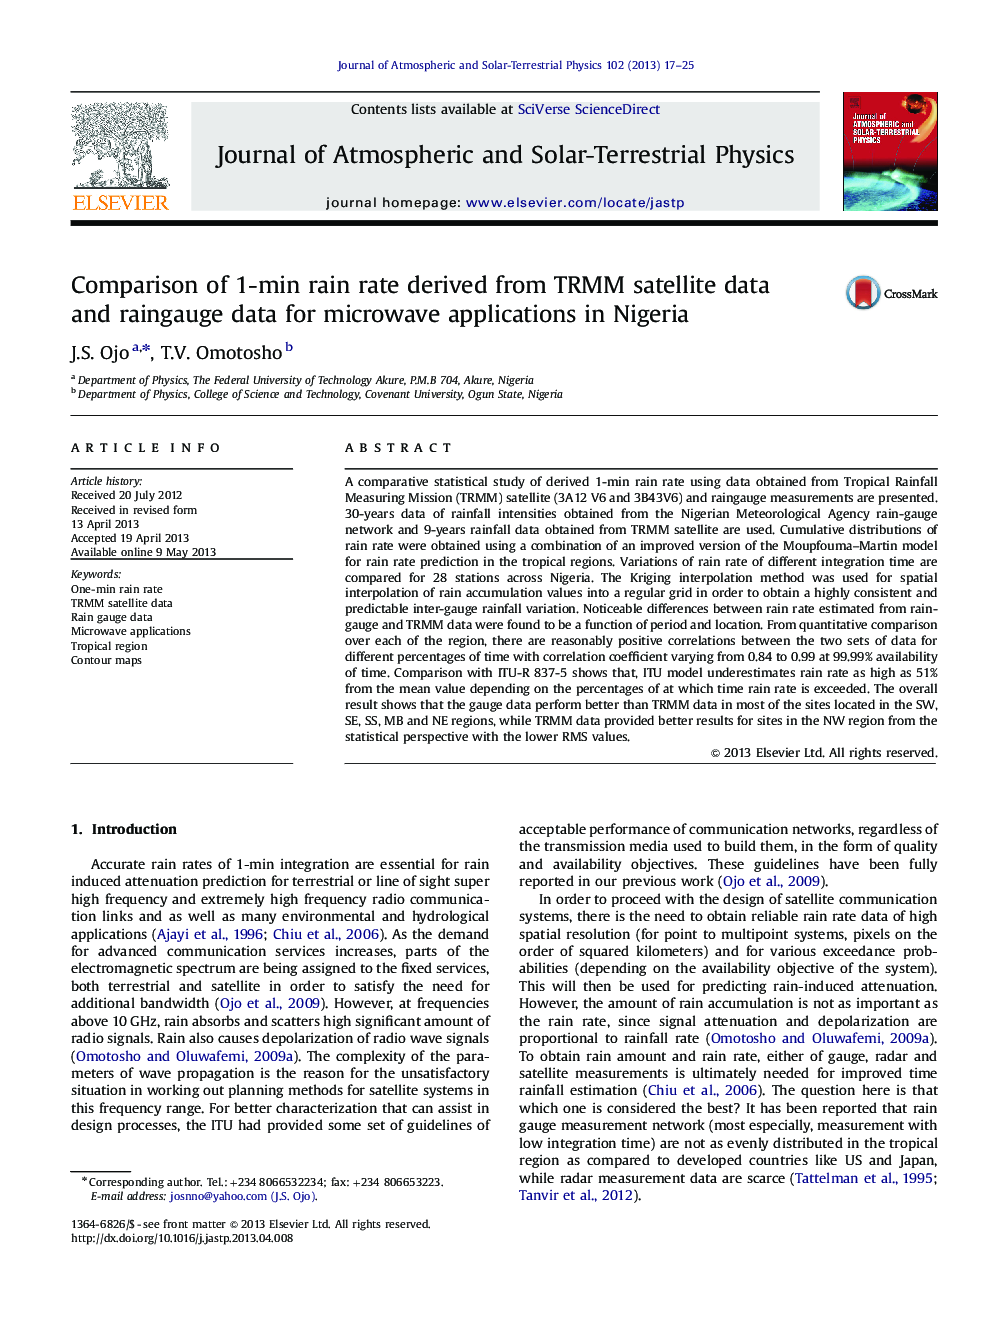 Comparison of 1-min rain rate derived from TRMM satellite data and raingauge data for microwave applications in Nigeria